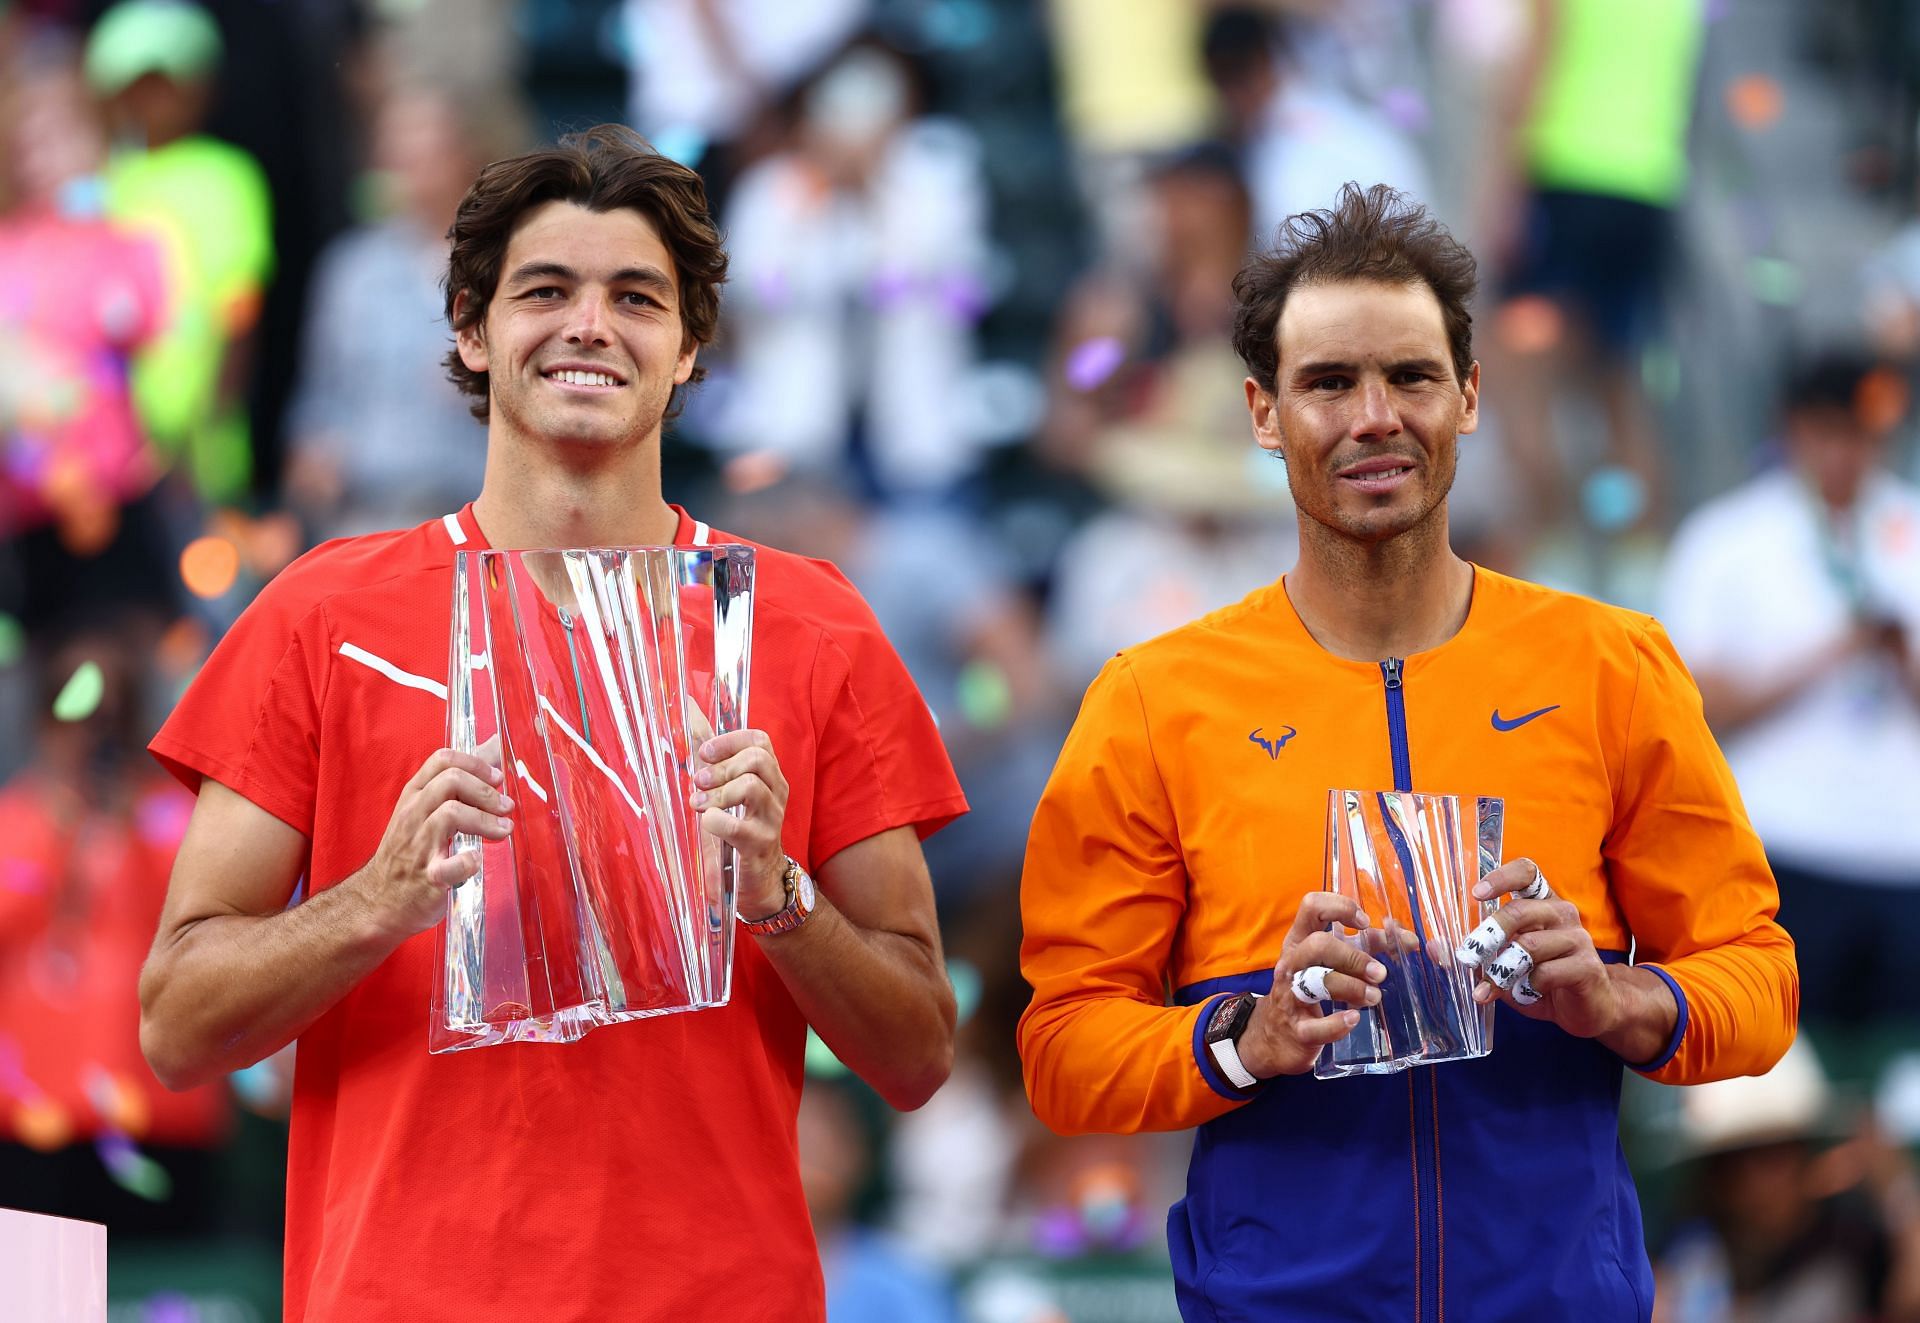 Rafael Nadal vs Taylor Fritz Where to watch, TV schedule, live streaming details and more 2022 ATP Finals